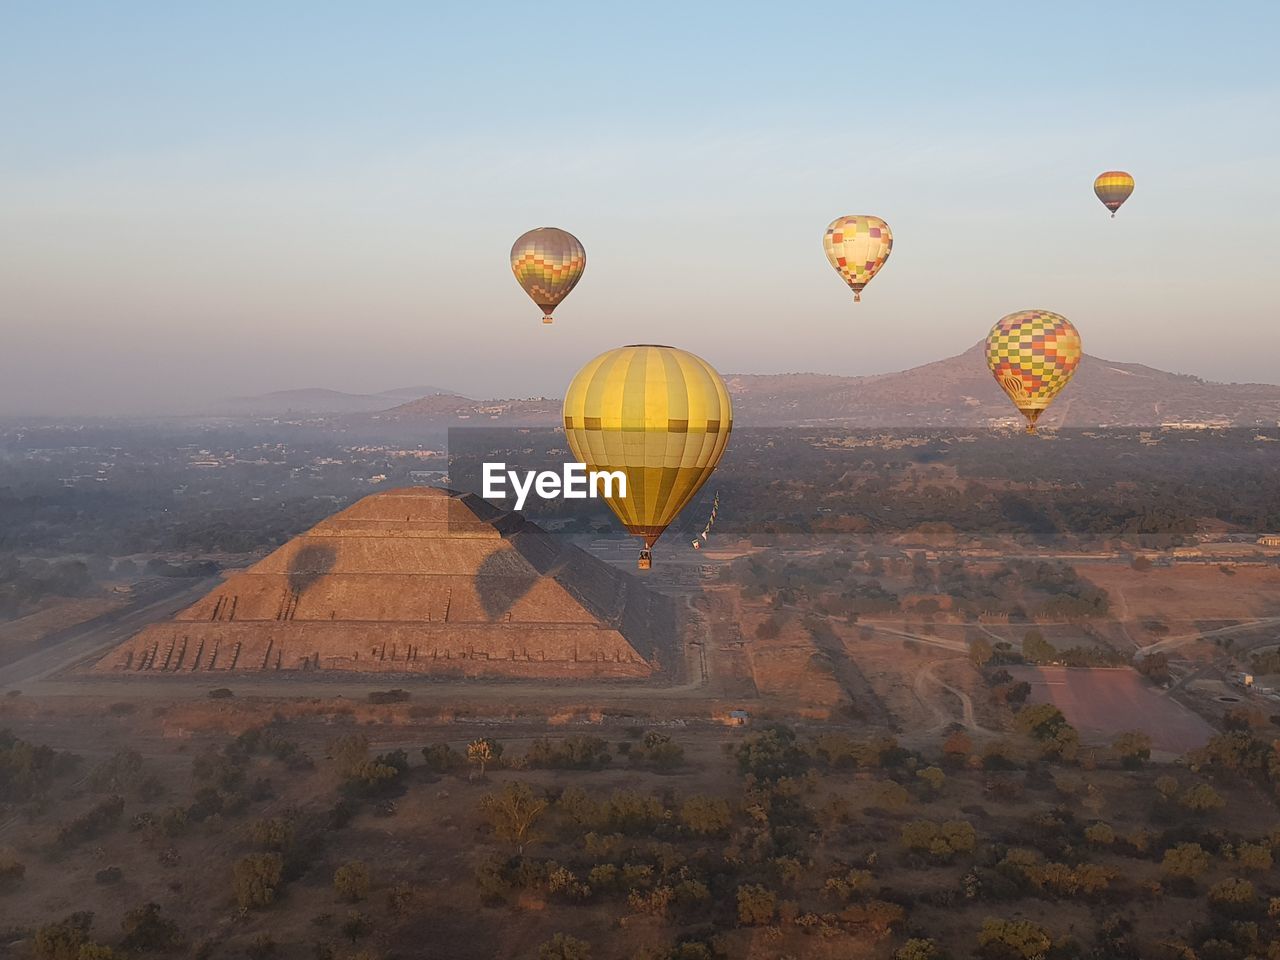 Hot air balloons flying over landscape and ancient pyramid